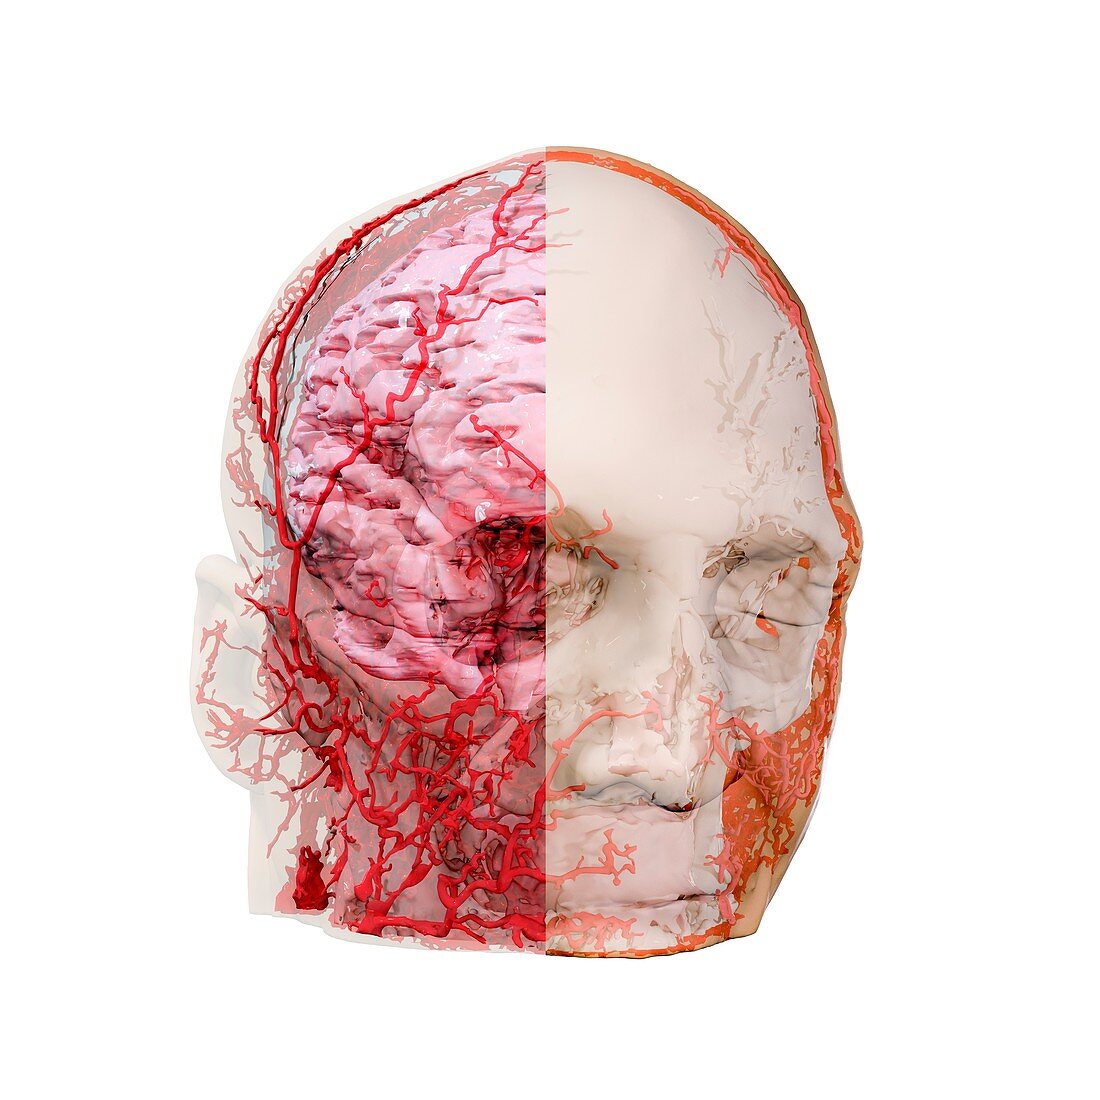 Human head and brain blood vessels, 3D CT scan